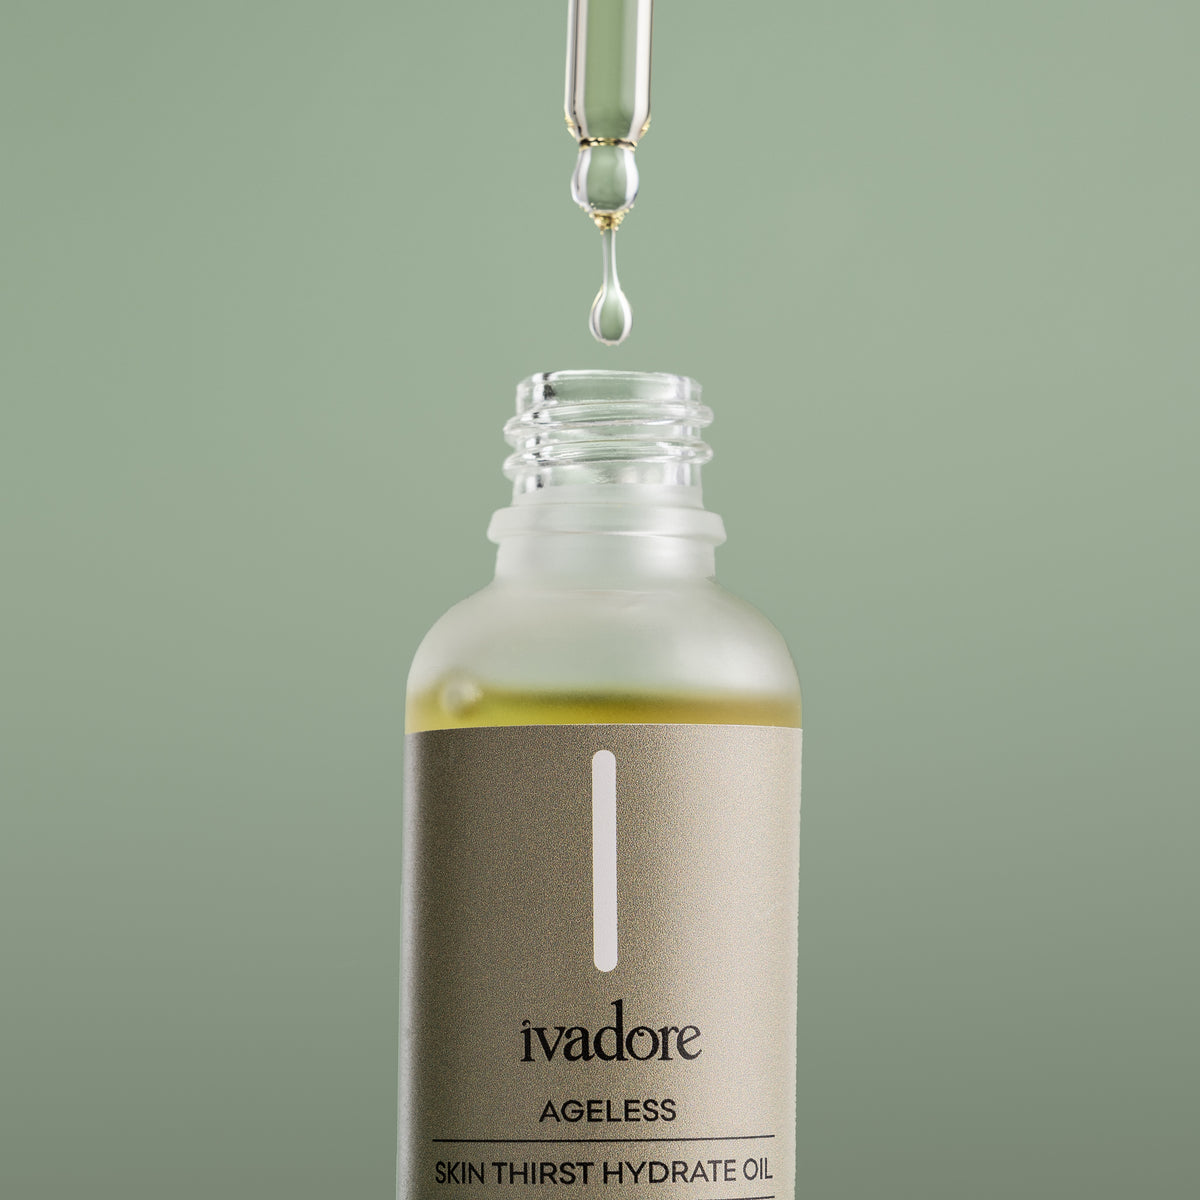 Close up view of Ivadore Ageless face oil with glass pippette dripping oil into bottle